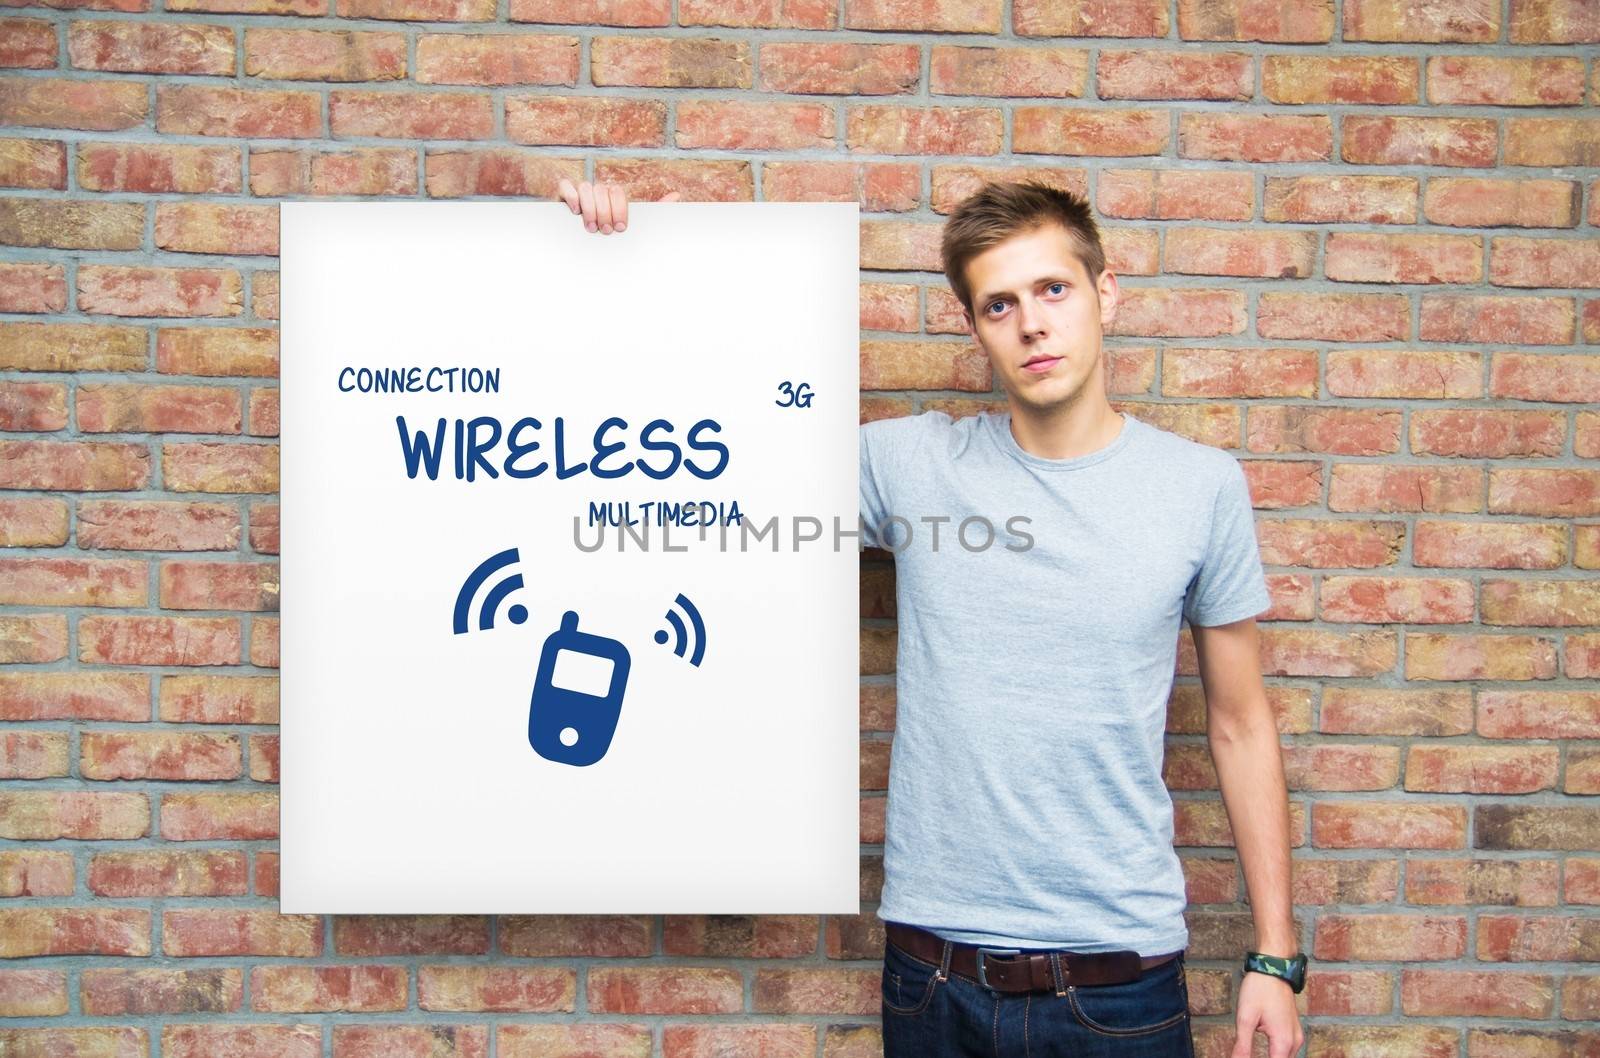 Young man holding whiteboard with multimedia content